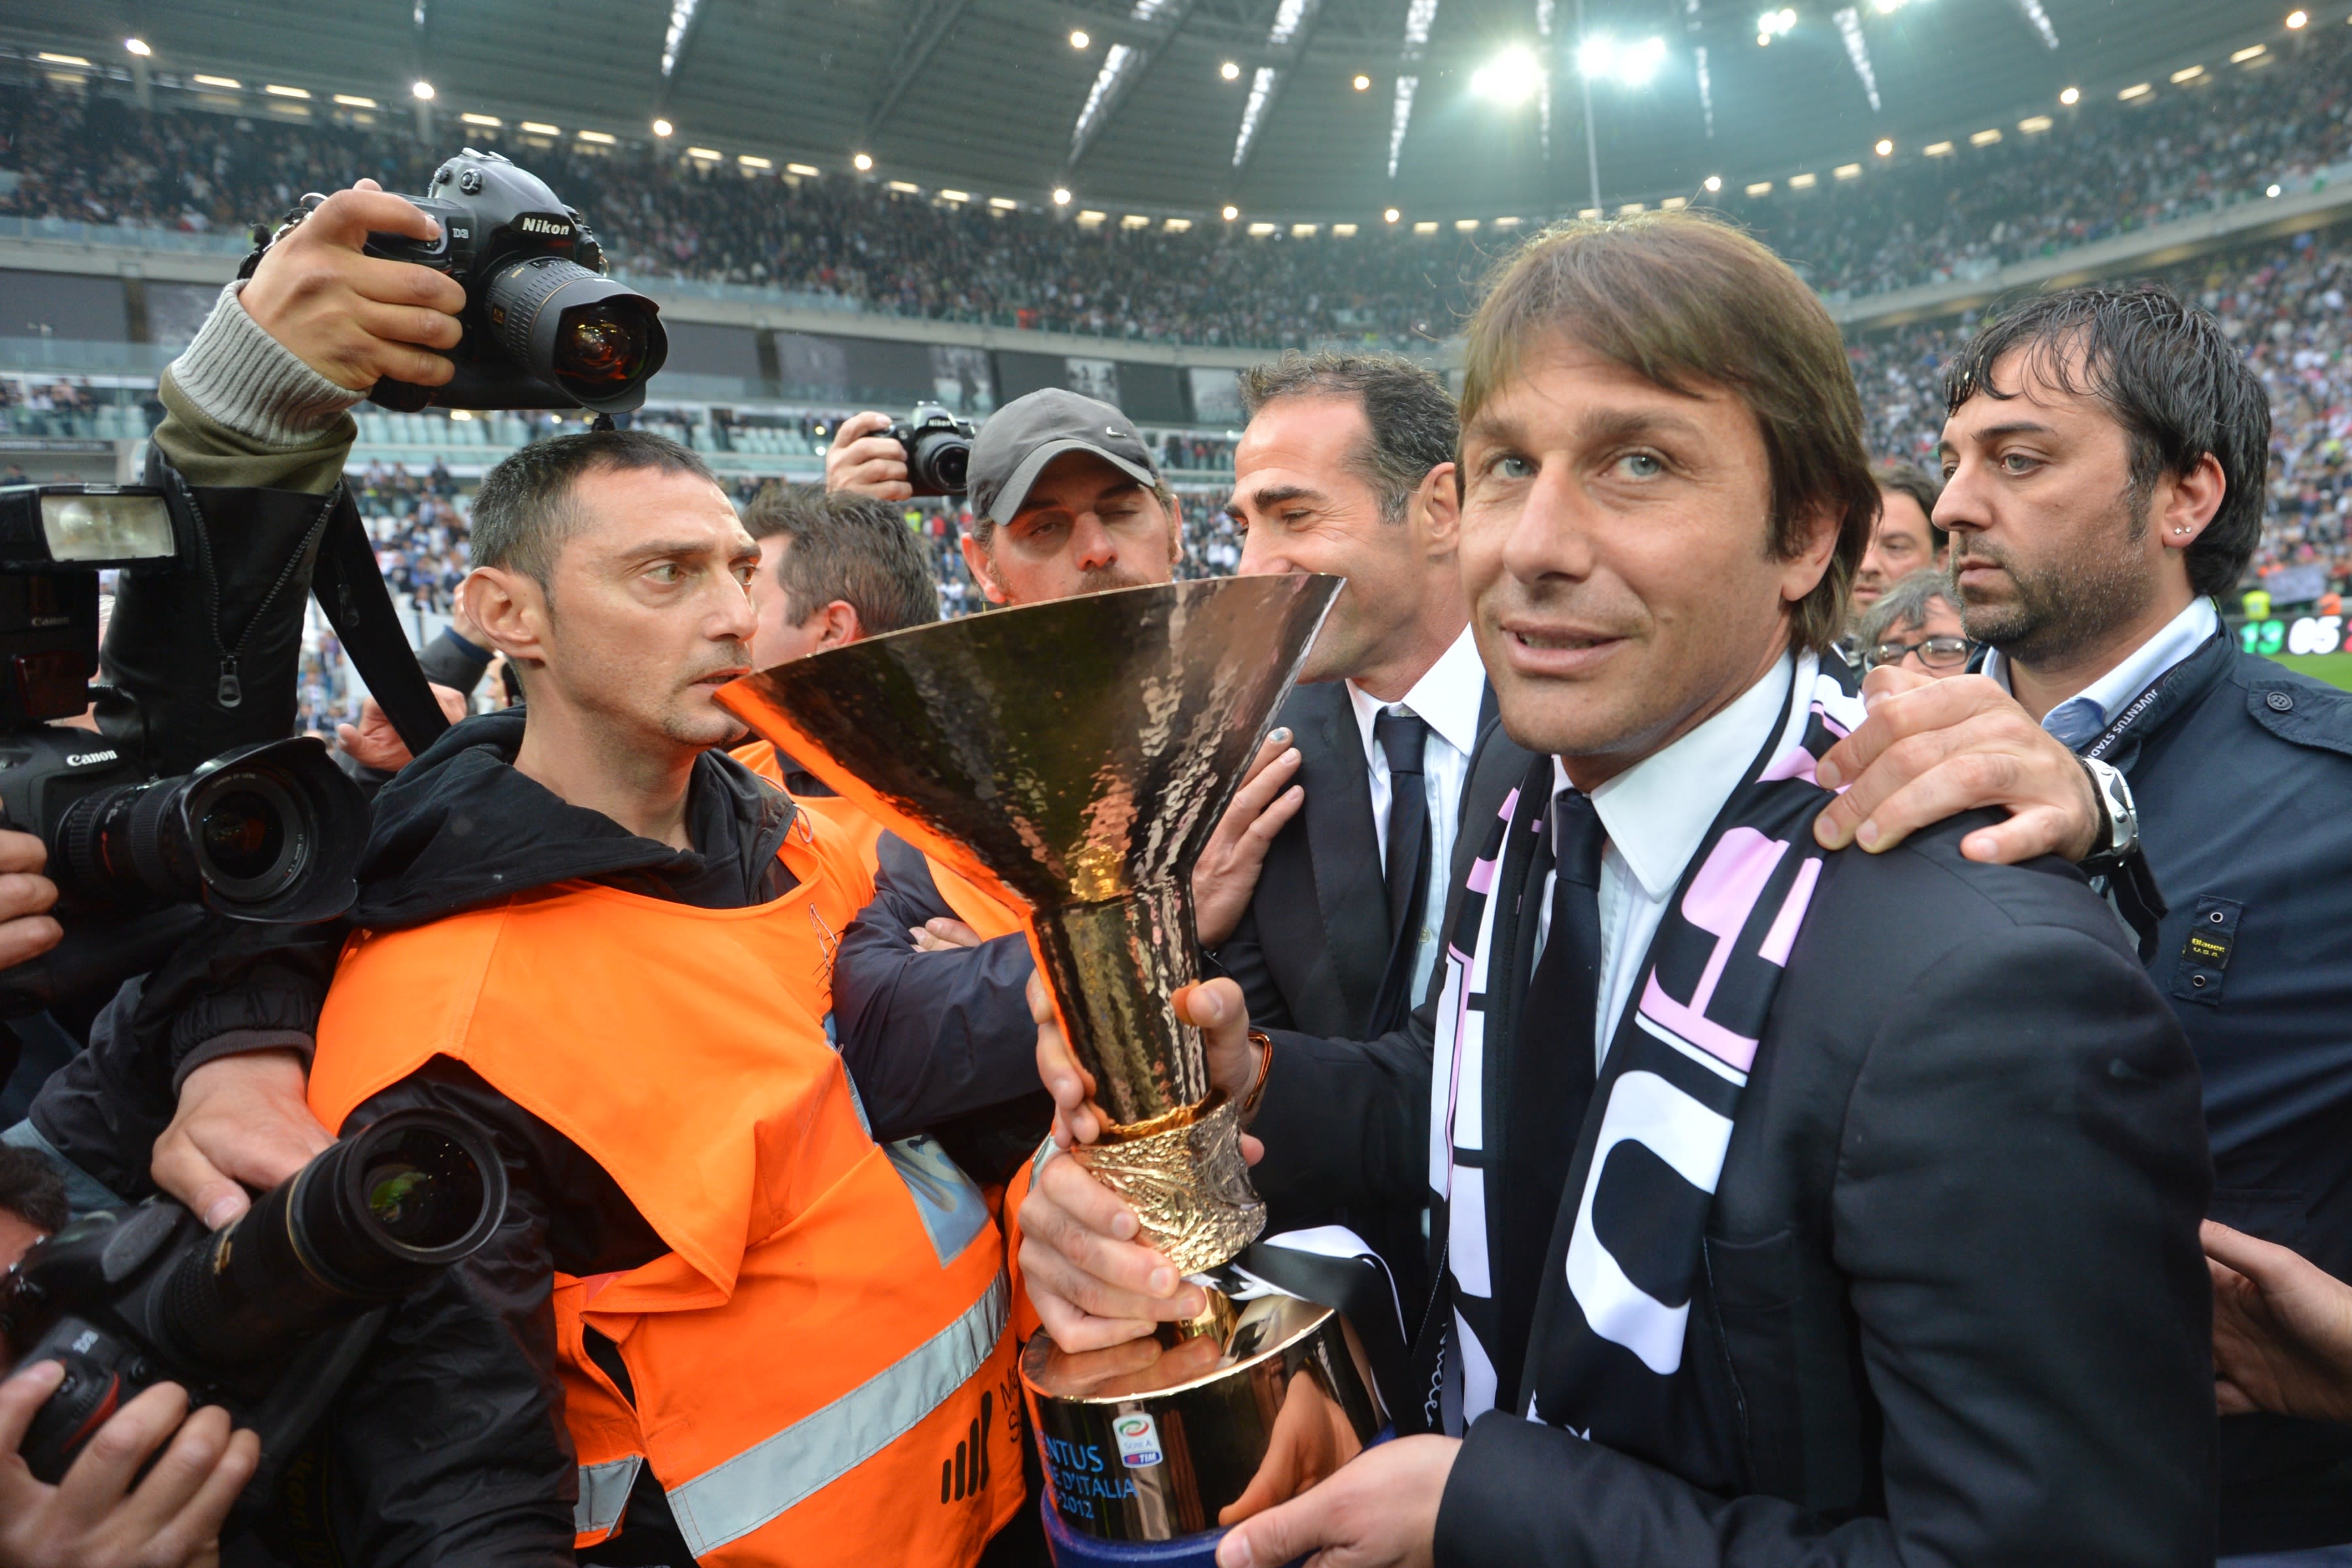 Serie A 2012-13 season review: Juventus add another title to their tally 